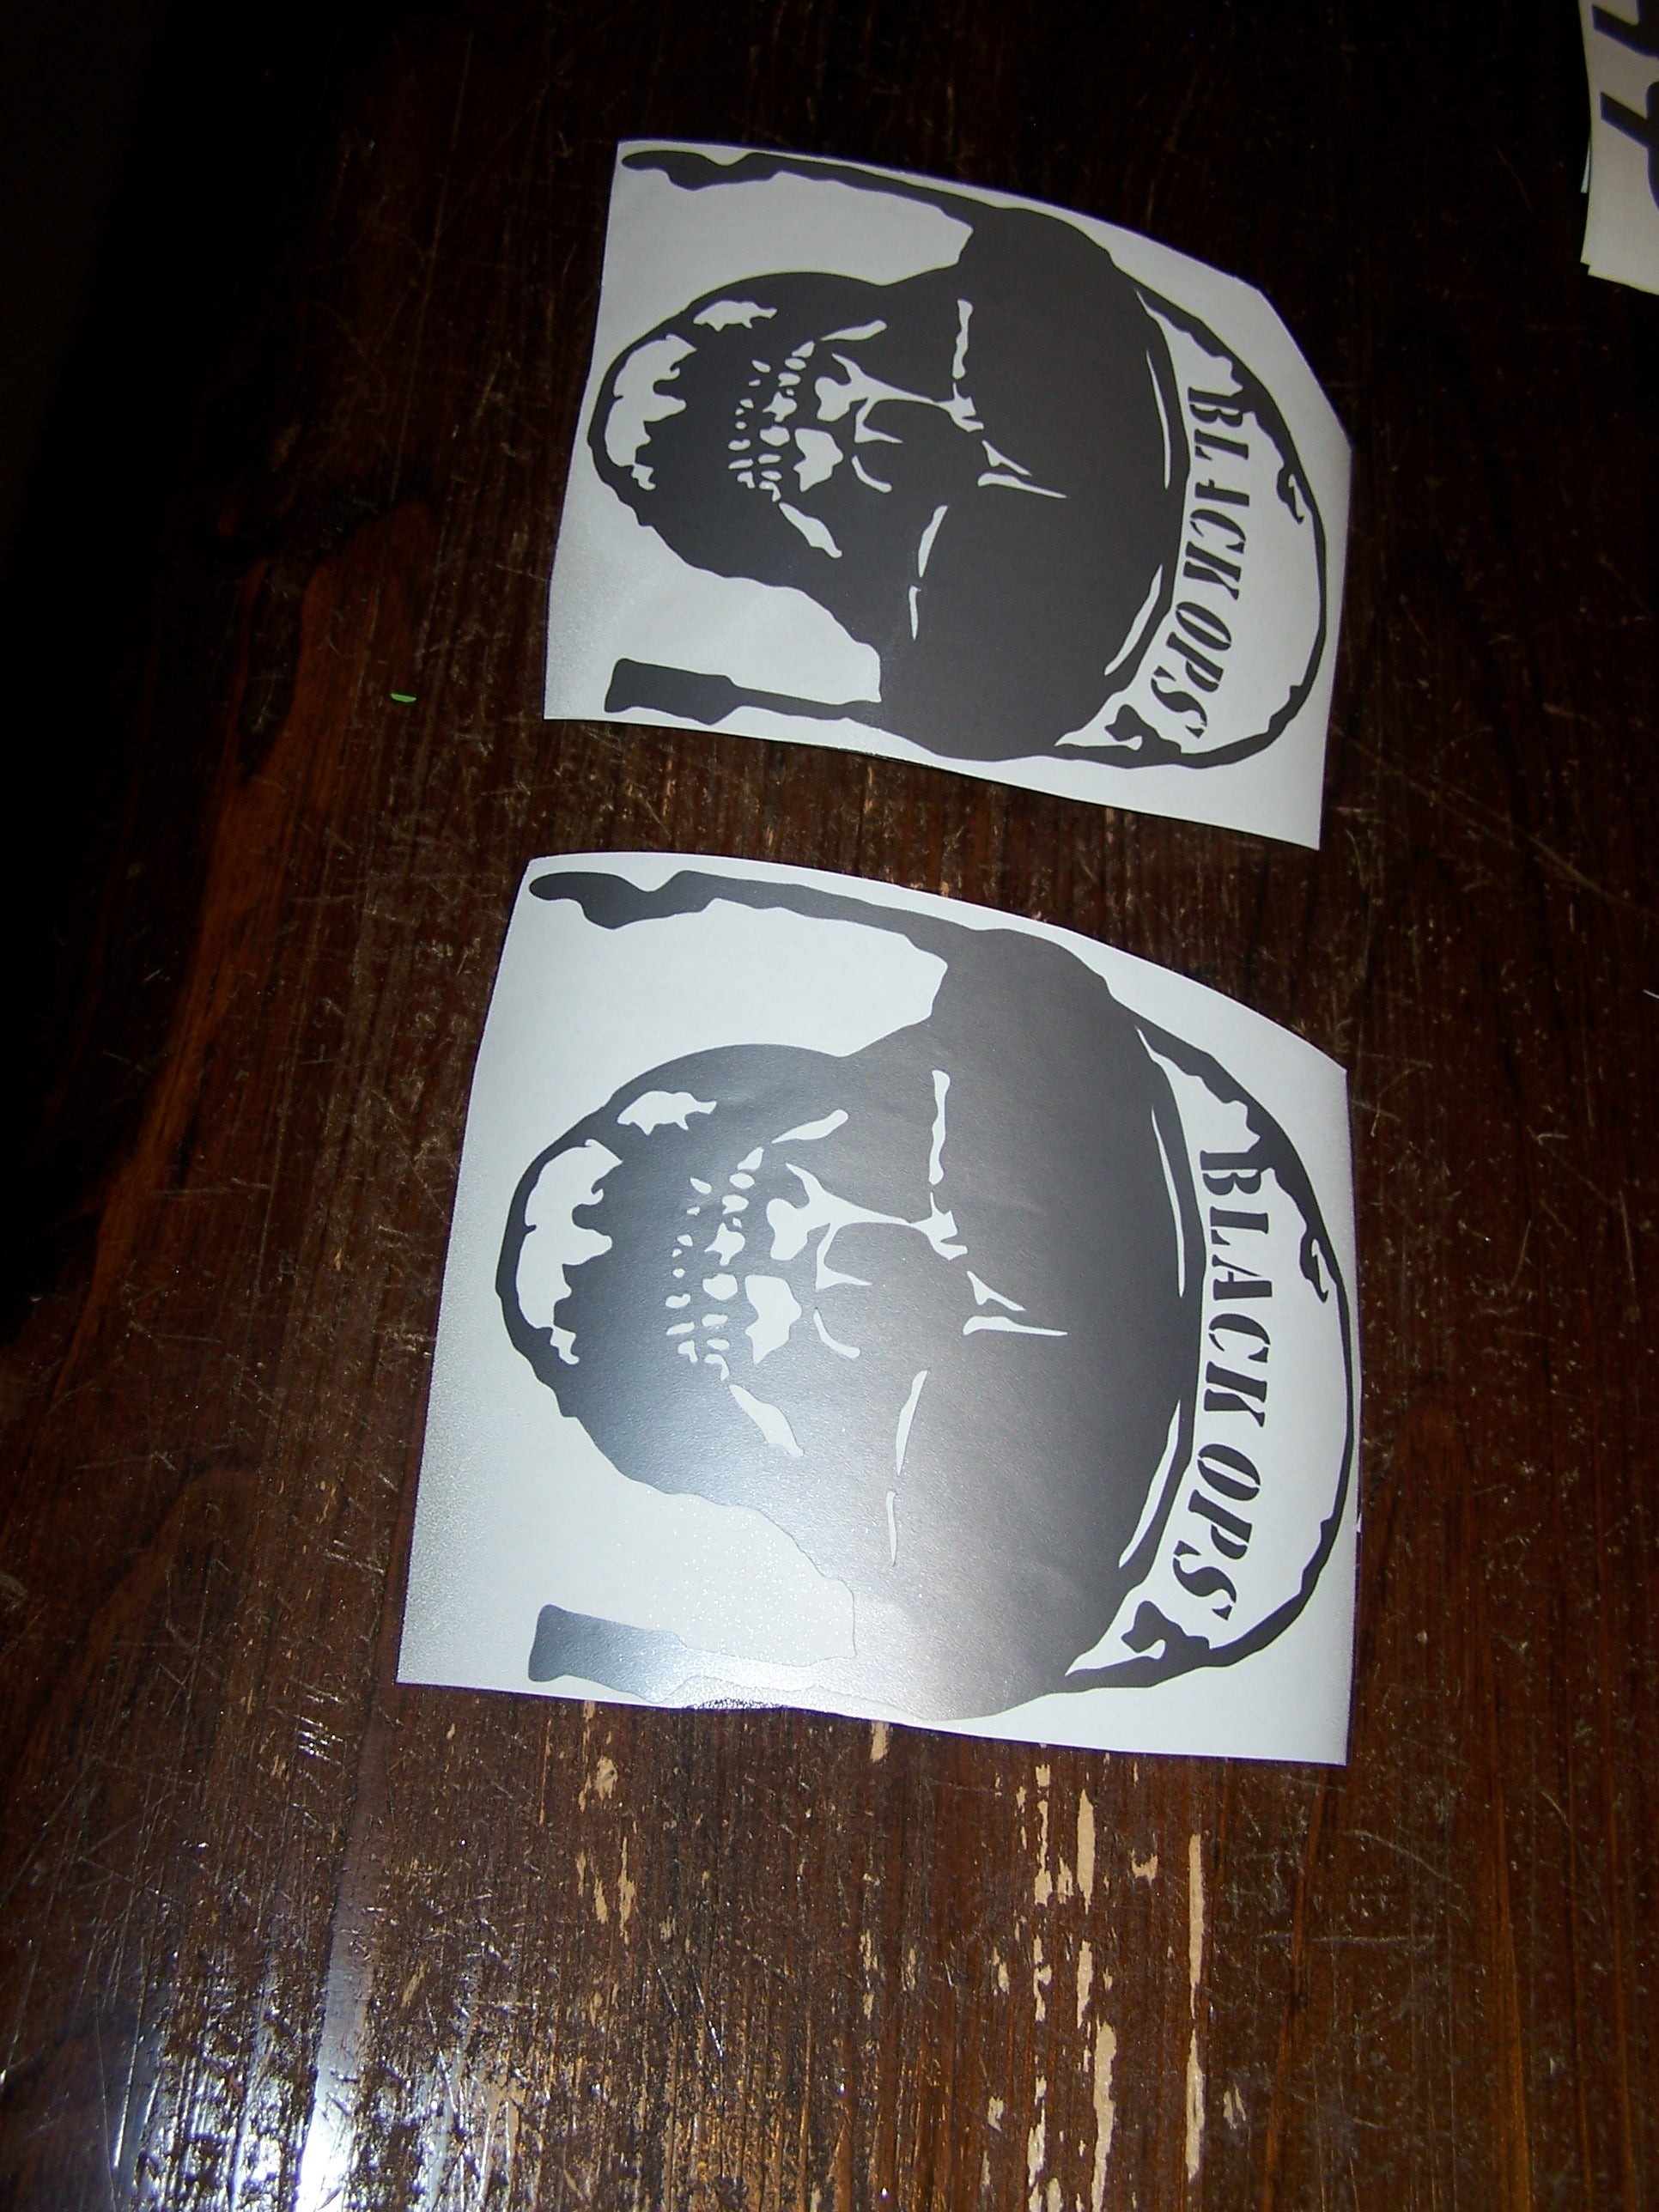 BLACK OPS SKULL DECAL SET OF 2 CALL OF DUTY